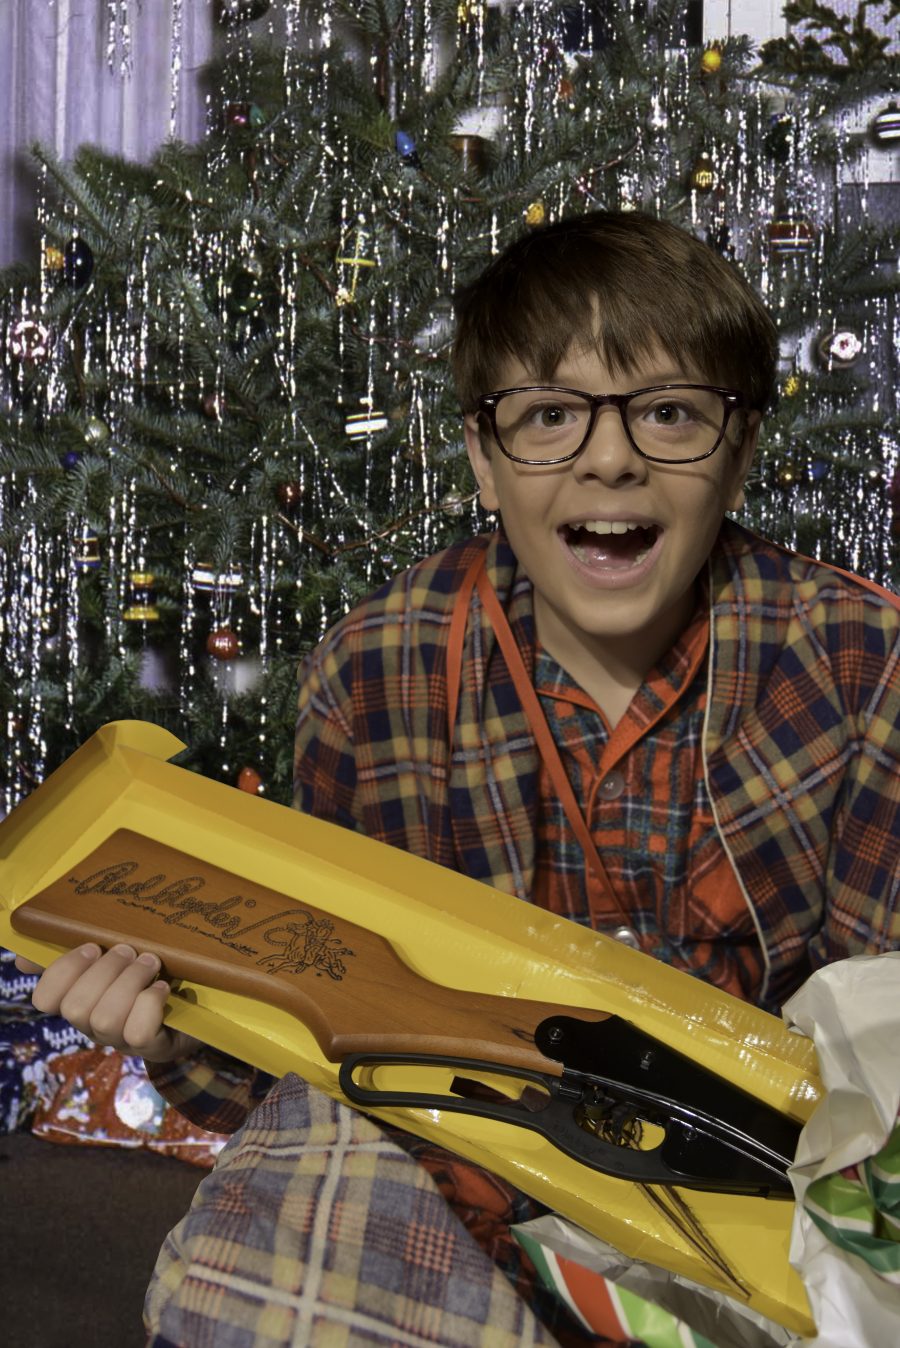 All Ralphie (Josh Hatfield) wants for Christmas is a Red Ryder carbine-action 200-shot range model air rifle BB gun. Will he get it? “A Christmas Story, the Musical” is currently on stage at the Round Barn Theatre in Nappanee through Dec. 31 and it’s a must see holiday production.